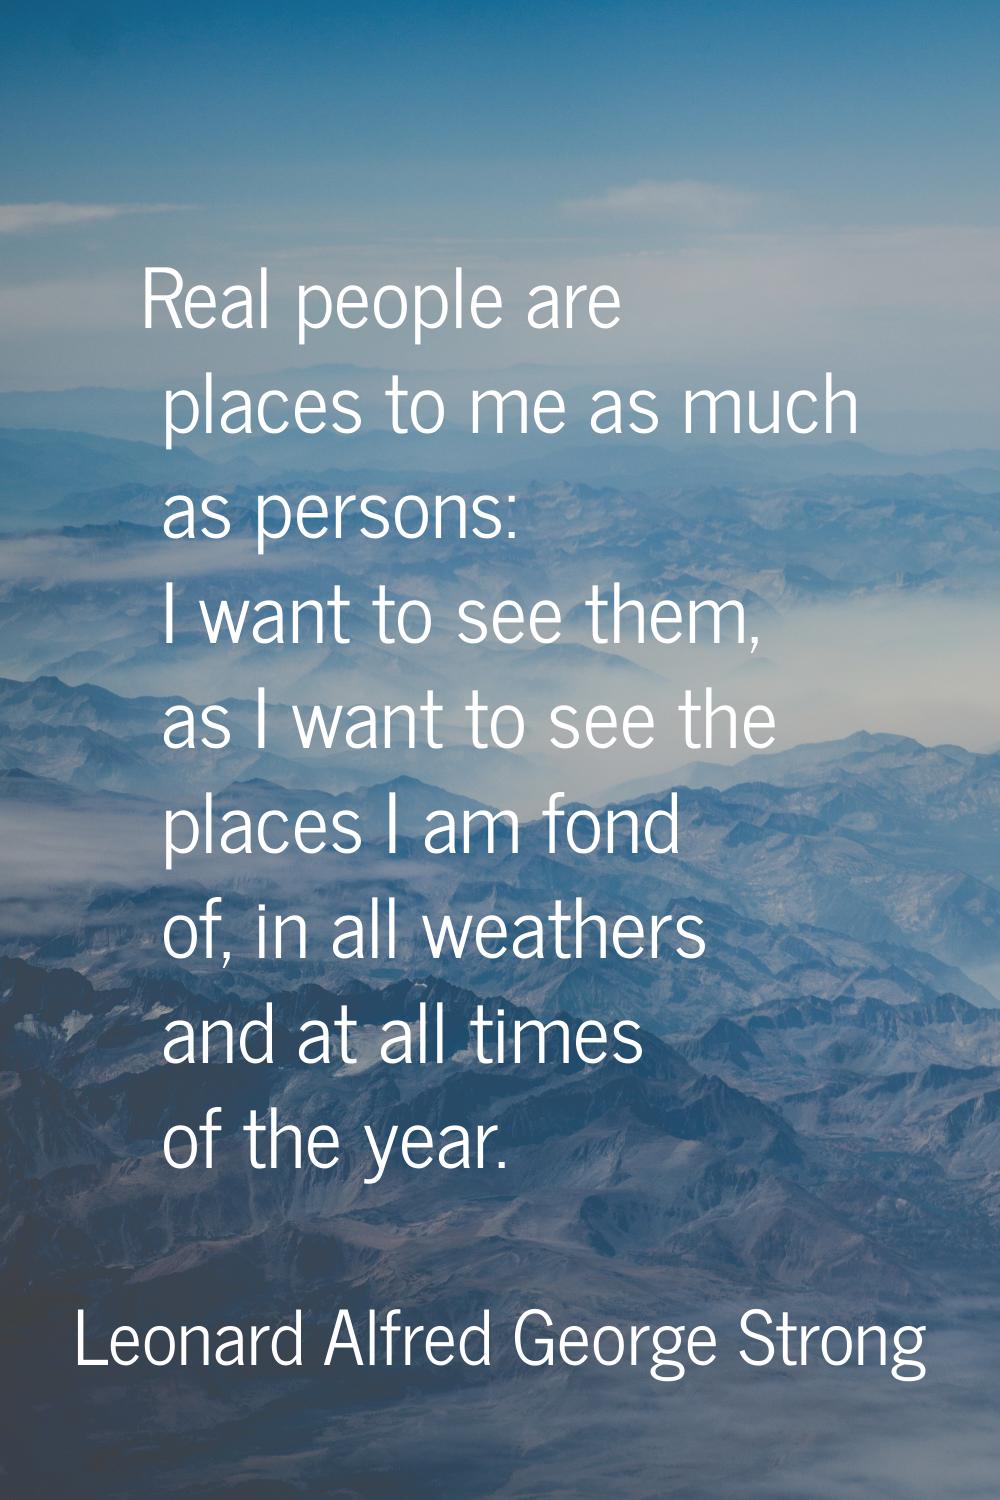 Real people are places to me as much as persons: I want to see them, as I want to see the places I 